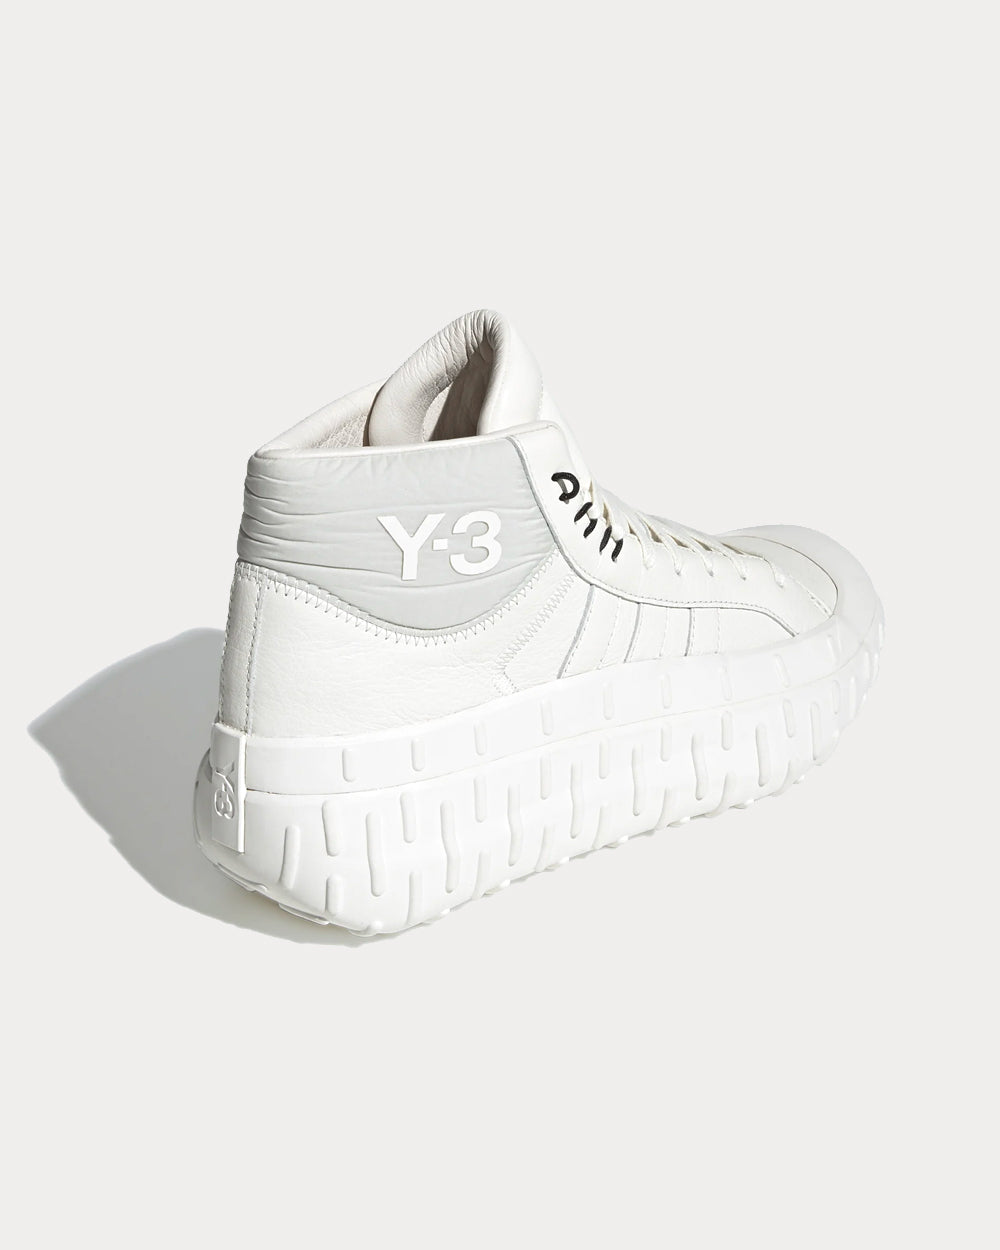 Y-3 - GR.1P High GTX White High Top Sneakers